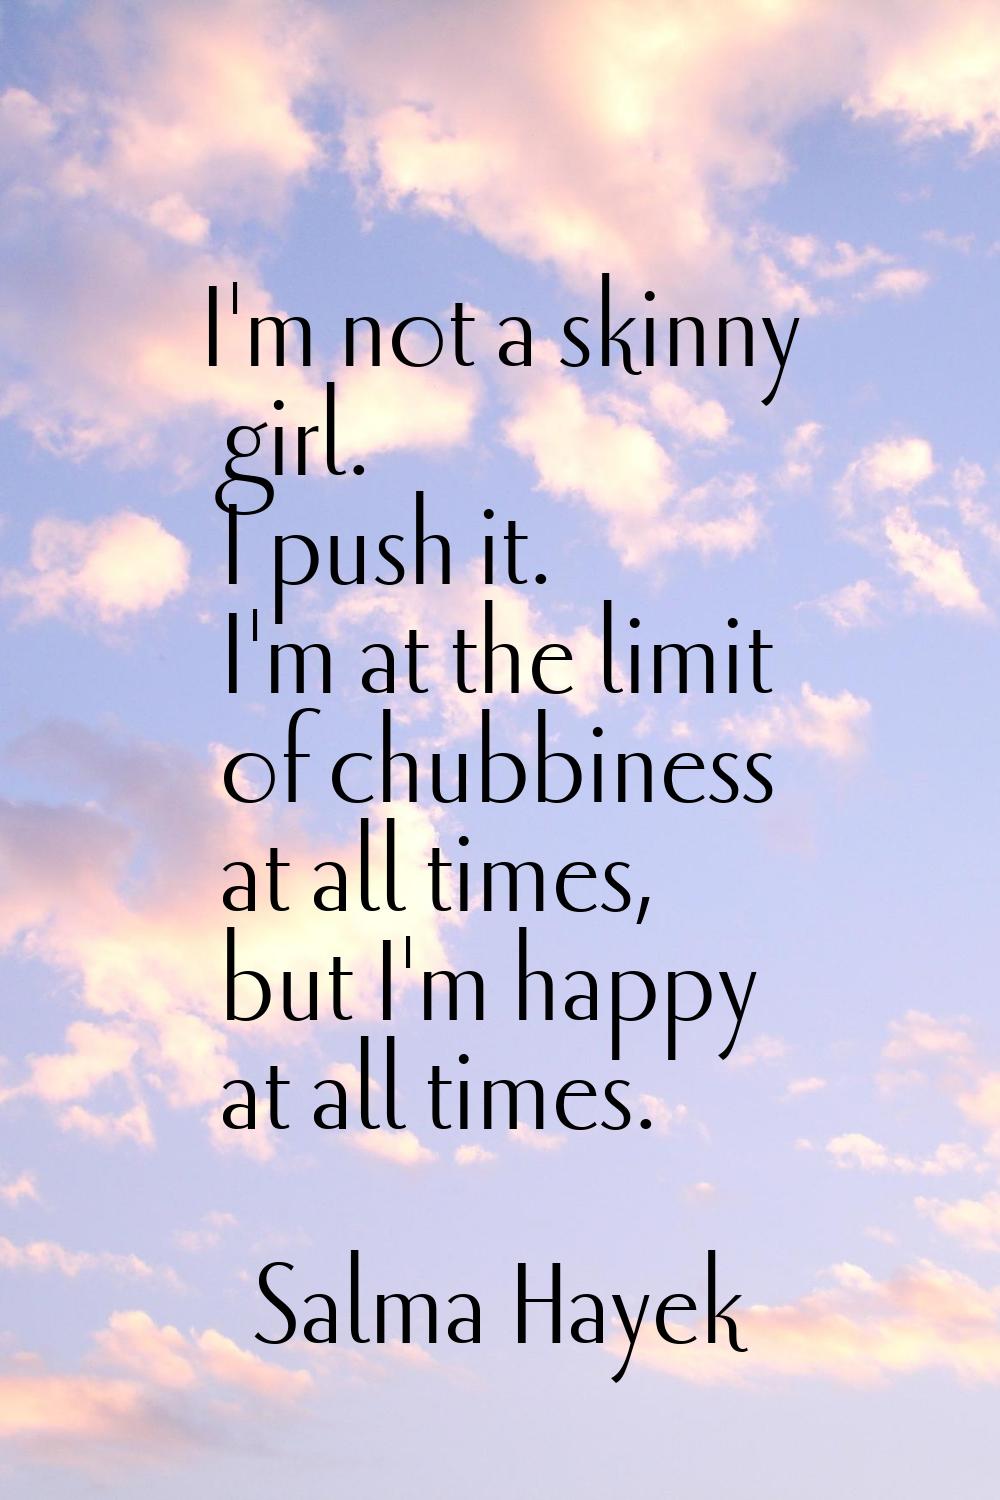 I'm not a skinny girl. I push it. I'm at the limit of chubbiness at all times, but I'm happy at all